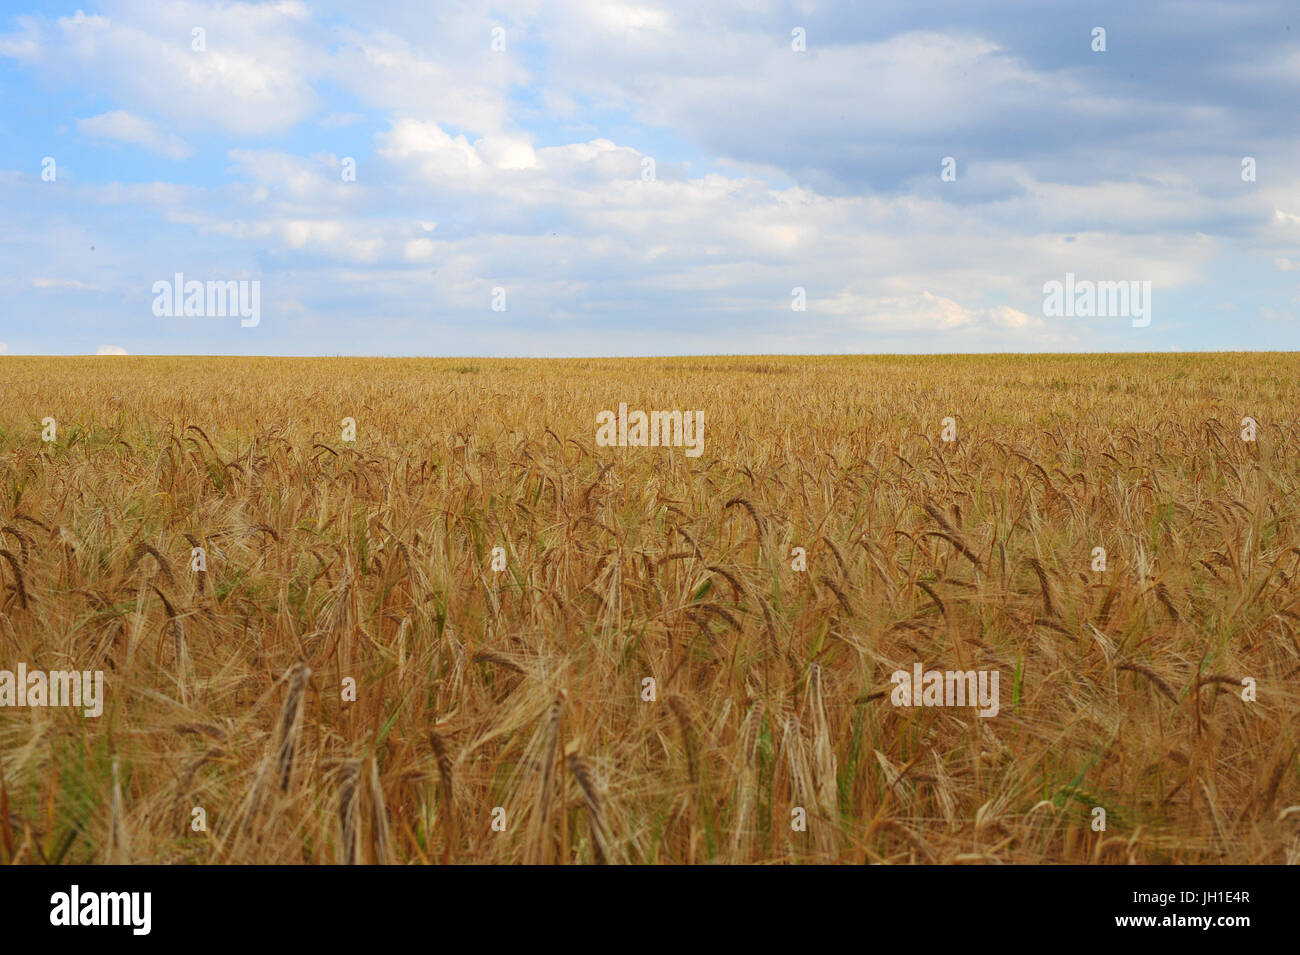 A crop of wheat in a field in Galleywood, Essex. Stock Photo